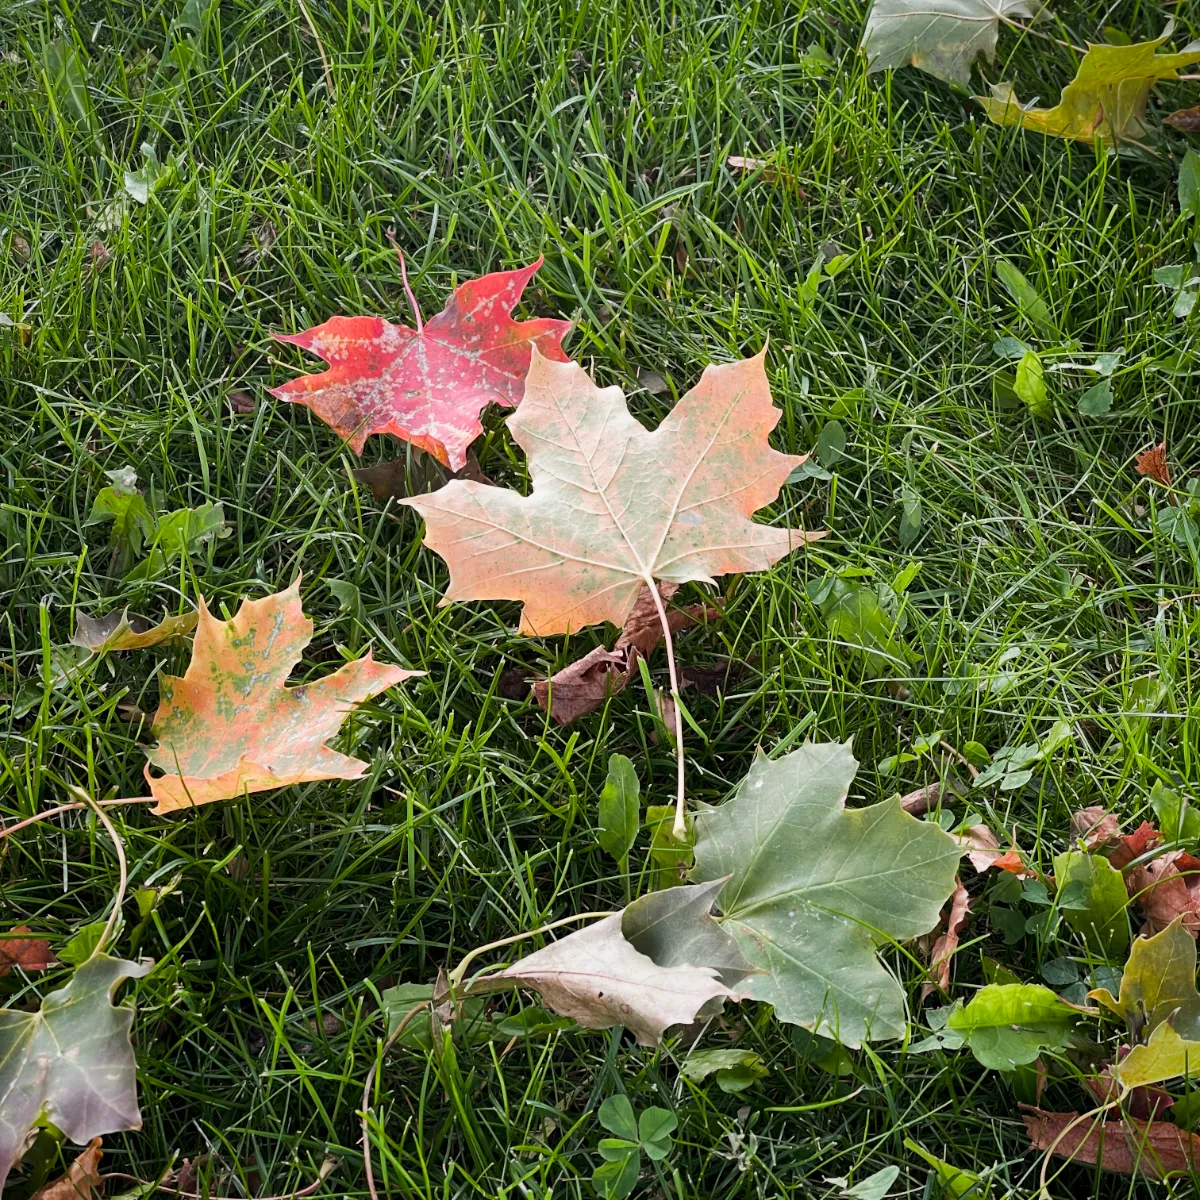 Fallen leaves on grass changing to fall colors